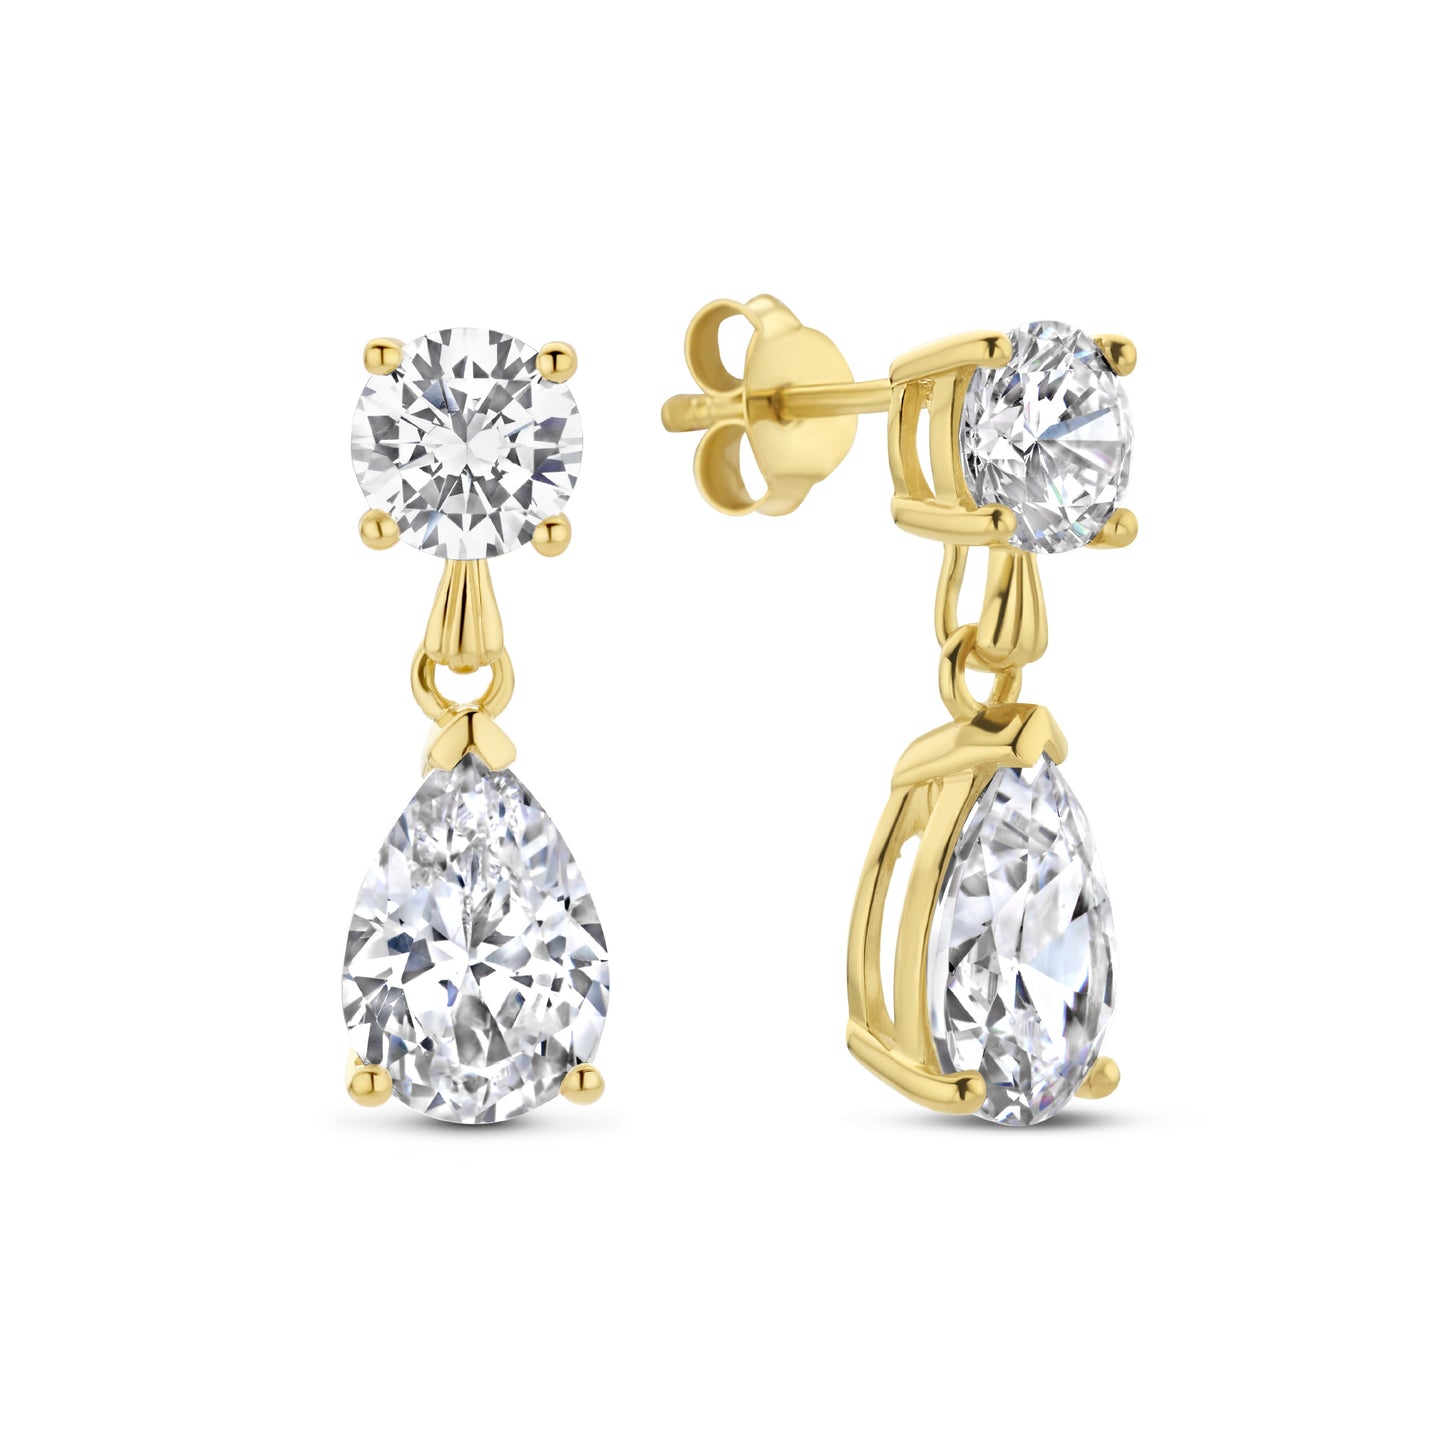 Ponte Vecchio Sienna 925 sterling silver gold plated drop earrings with zirconia stone